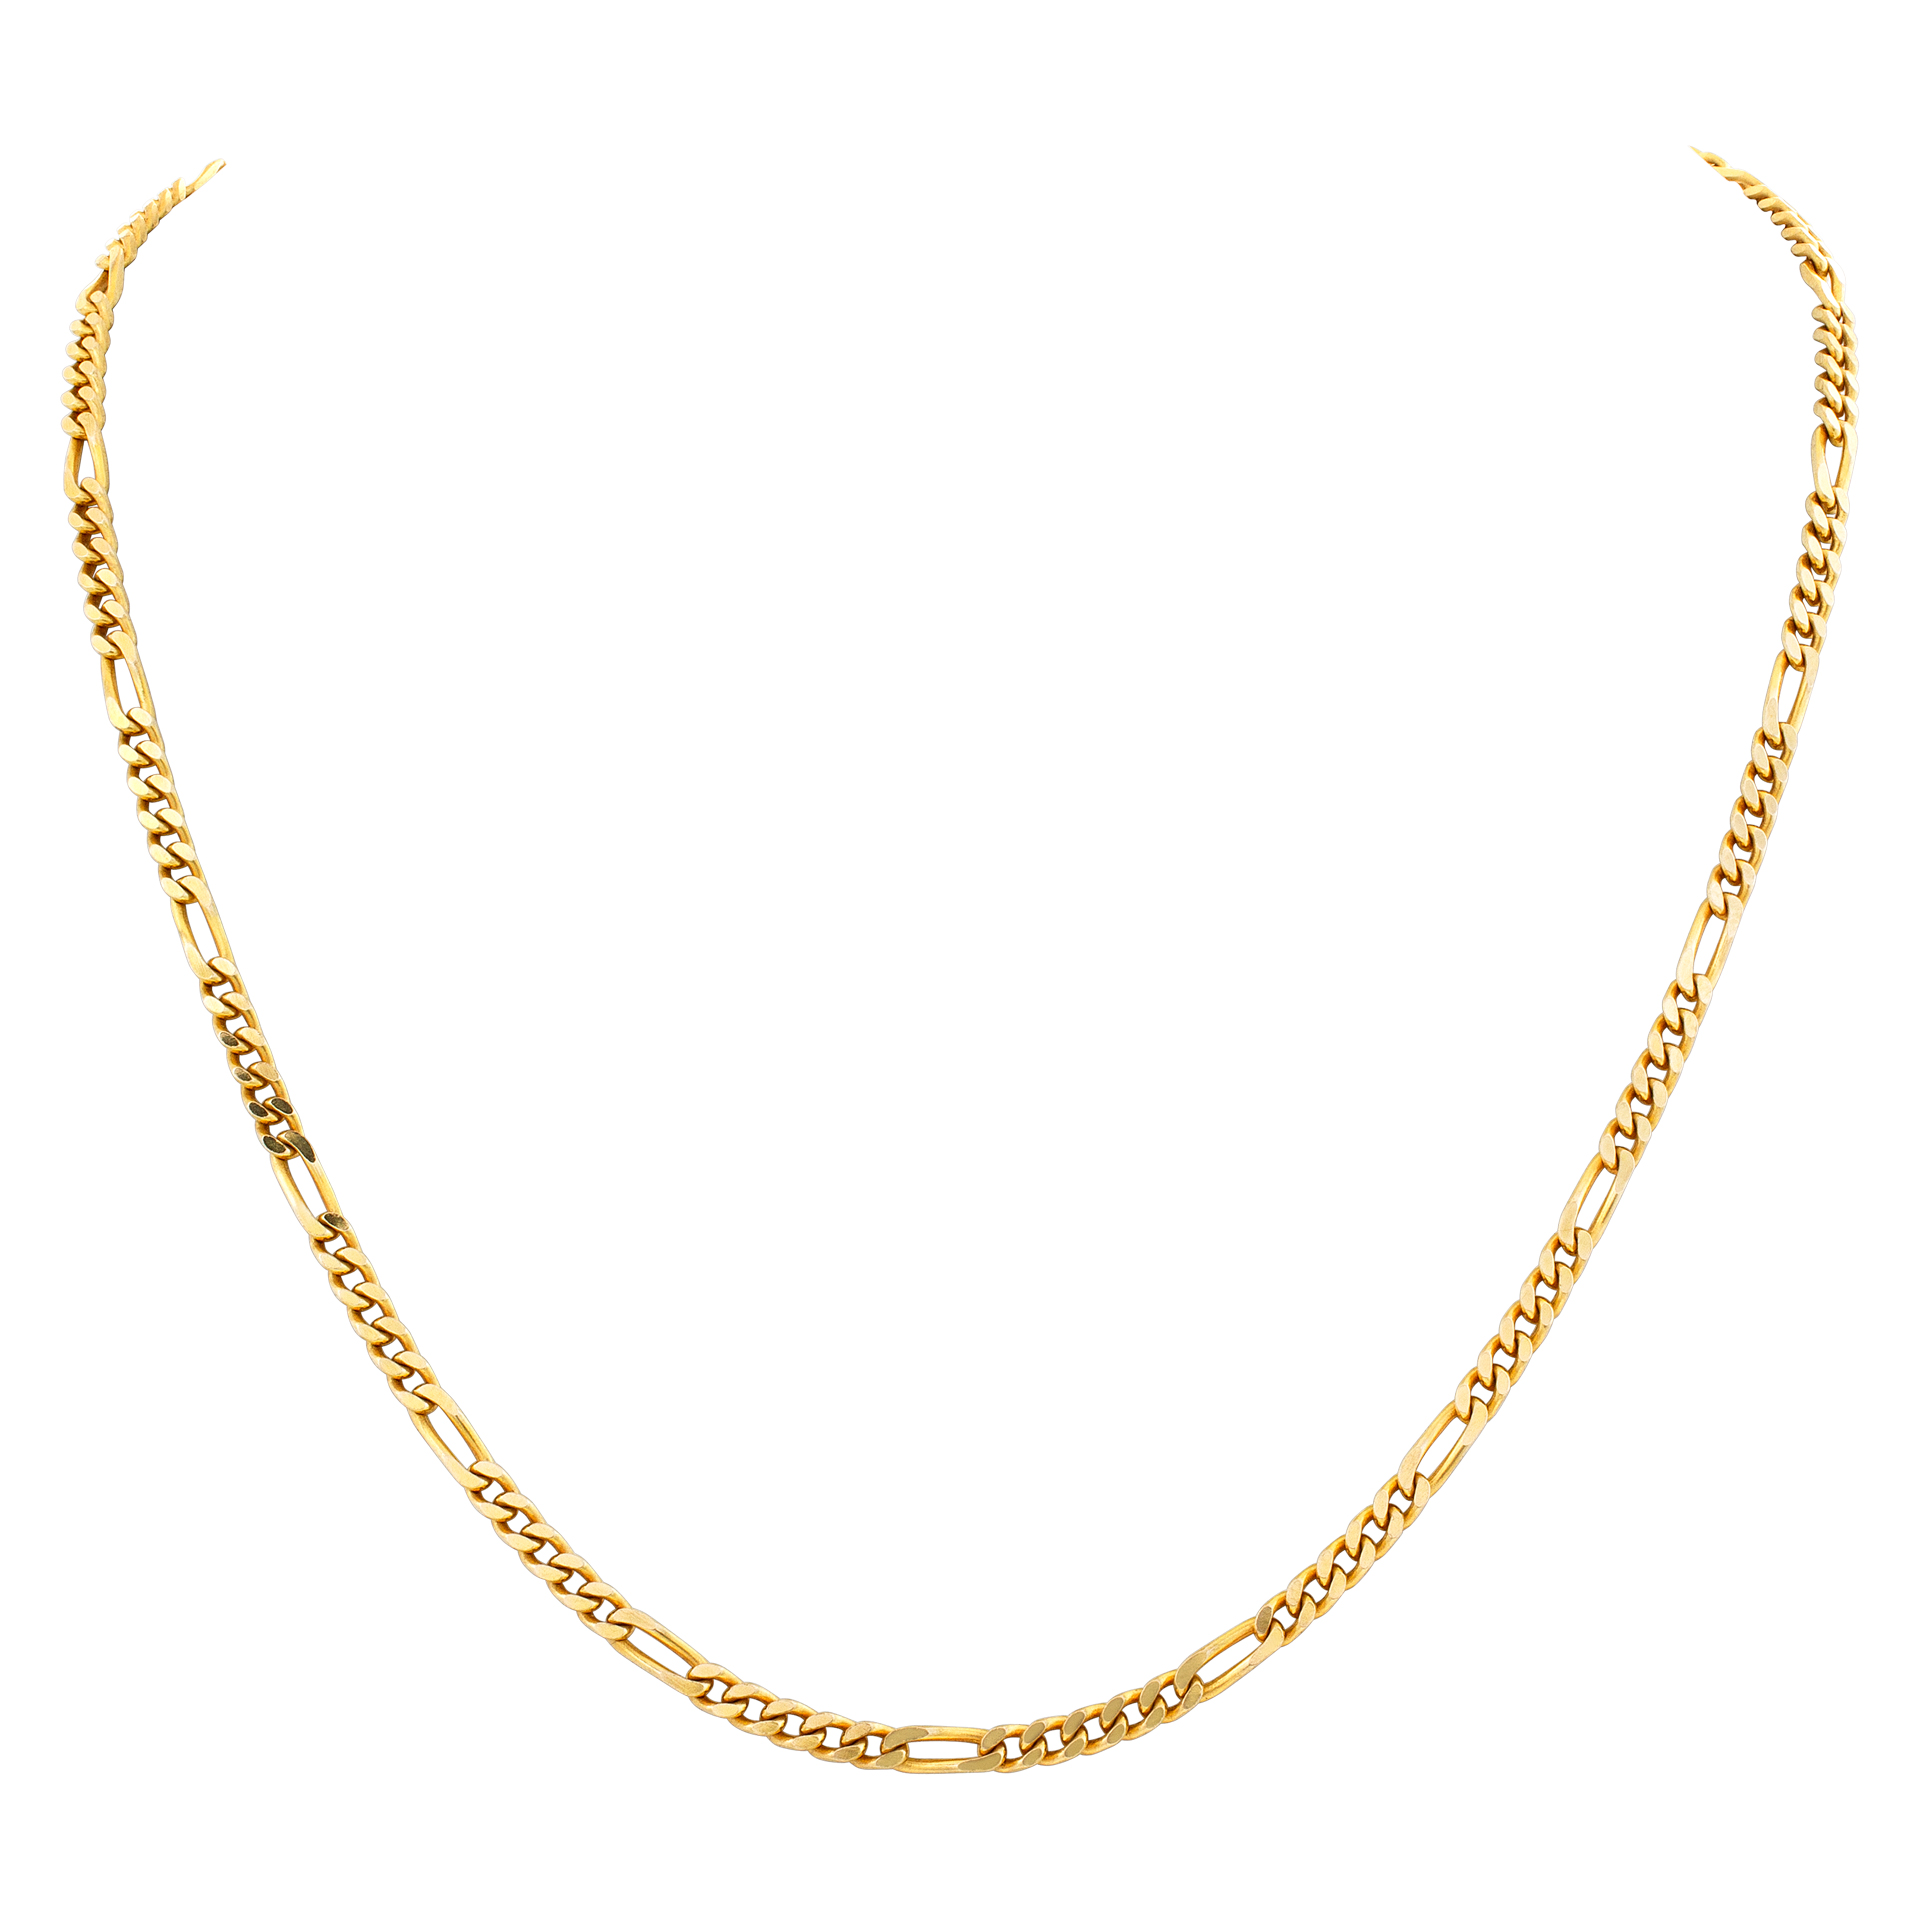 Figaro style link chain in 14k